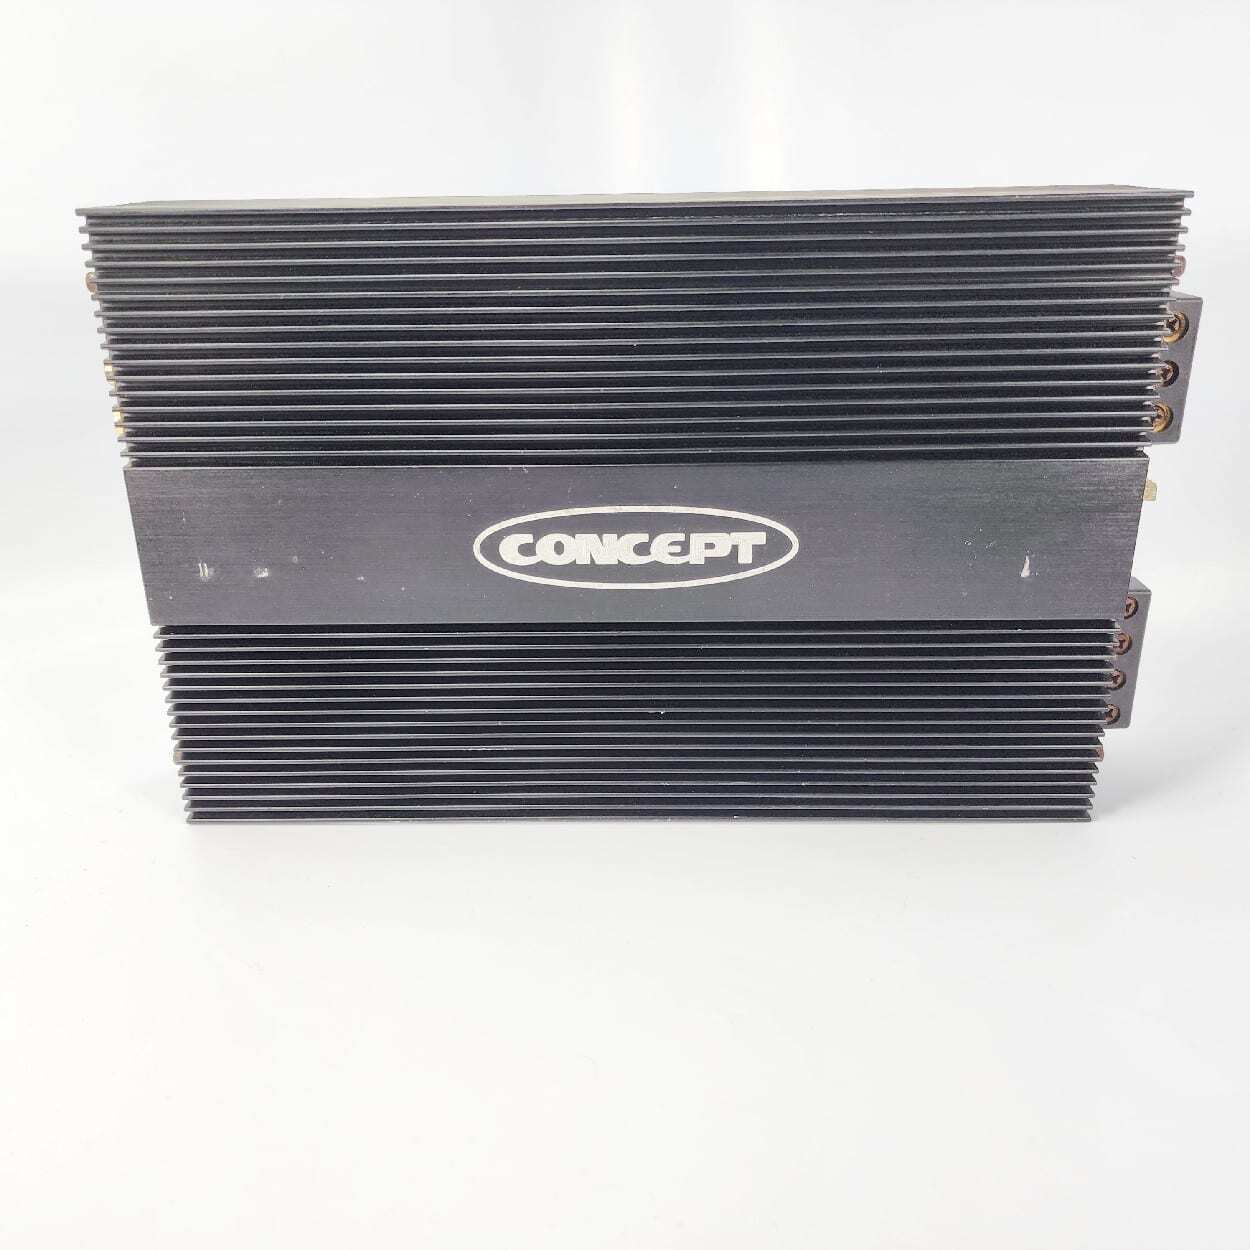 Concept HP-70.2 2-Channel 140 Watt Crossover Power Amplifier - Tested -Free Ship